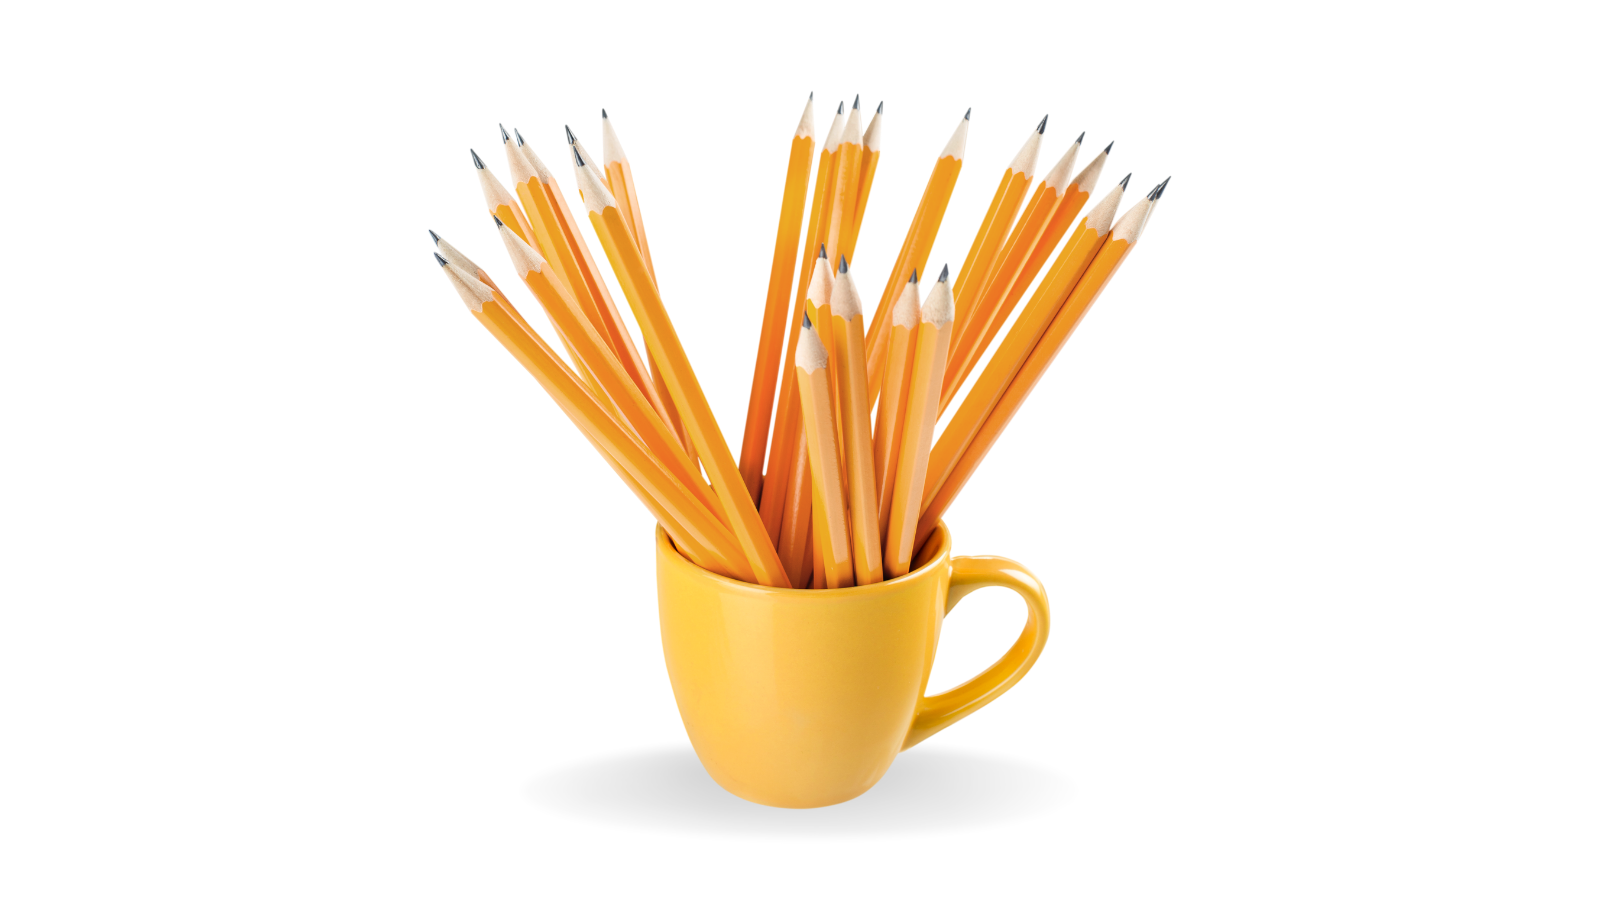 yellow teacup full of pencils